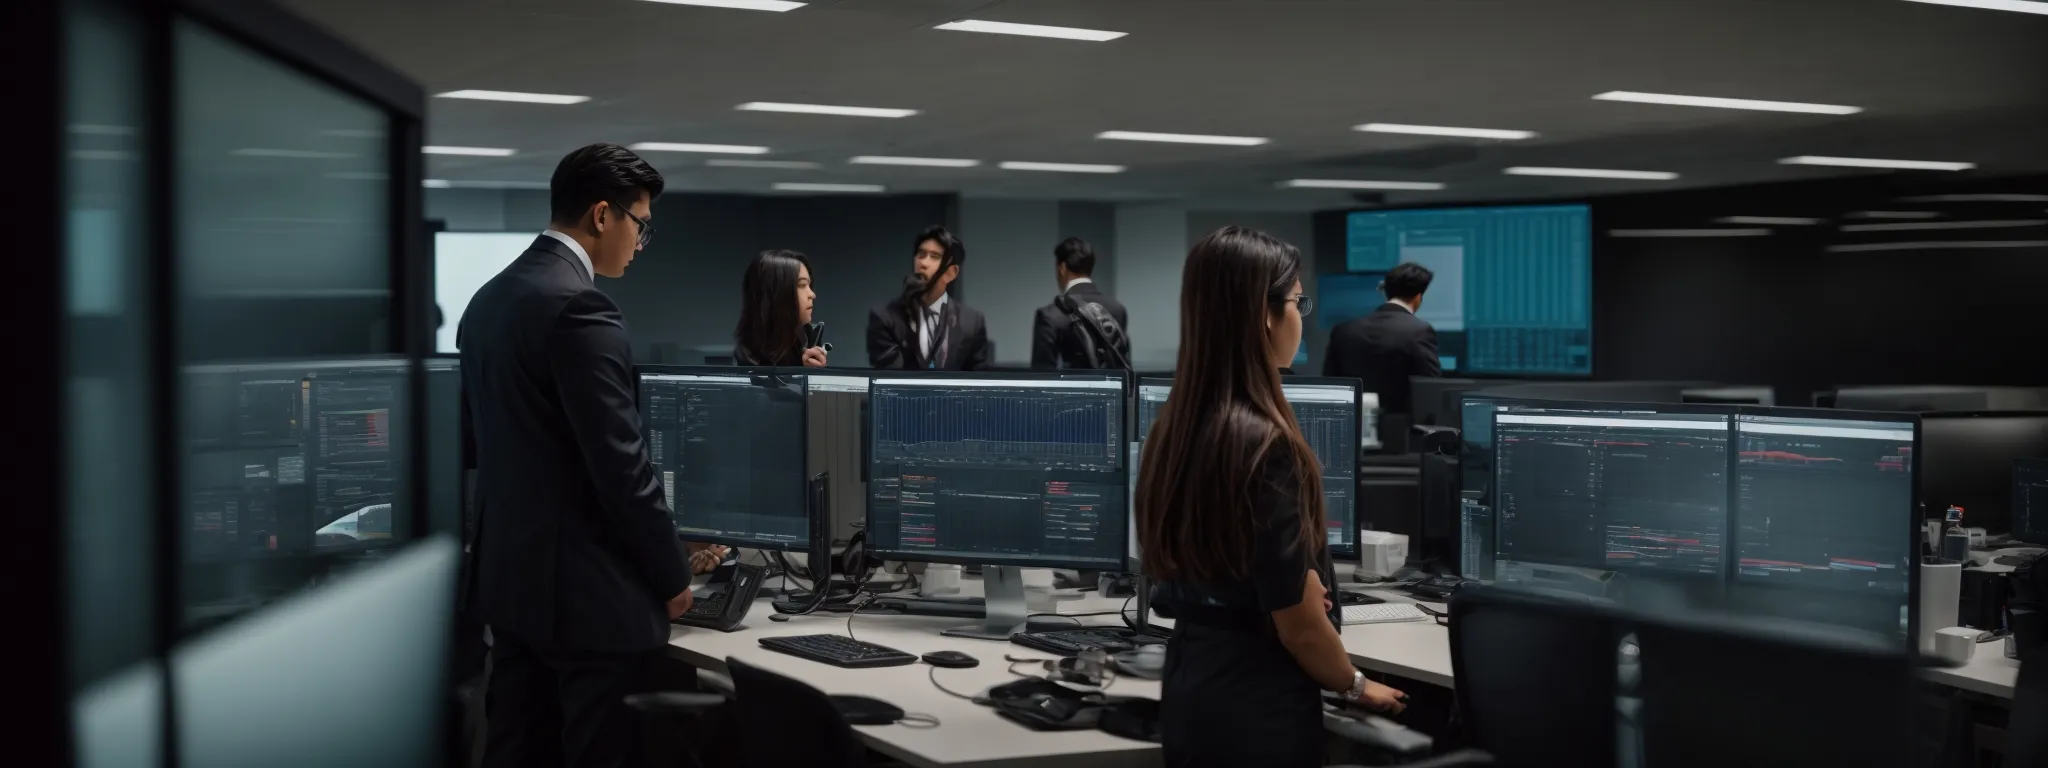 a team of professionals intently analyzing data on computer screens in a modern office setting.